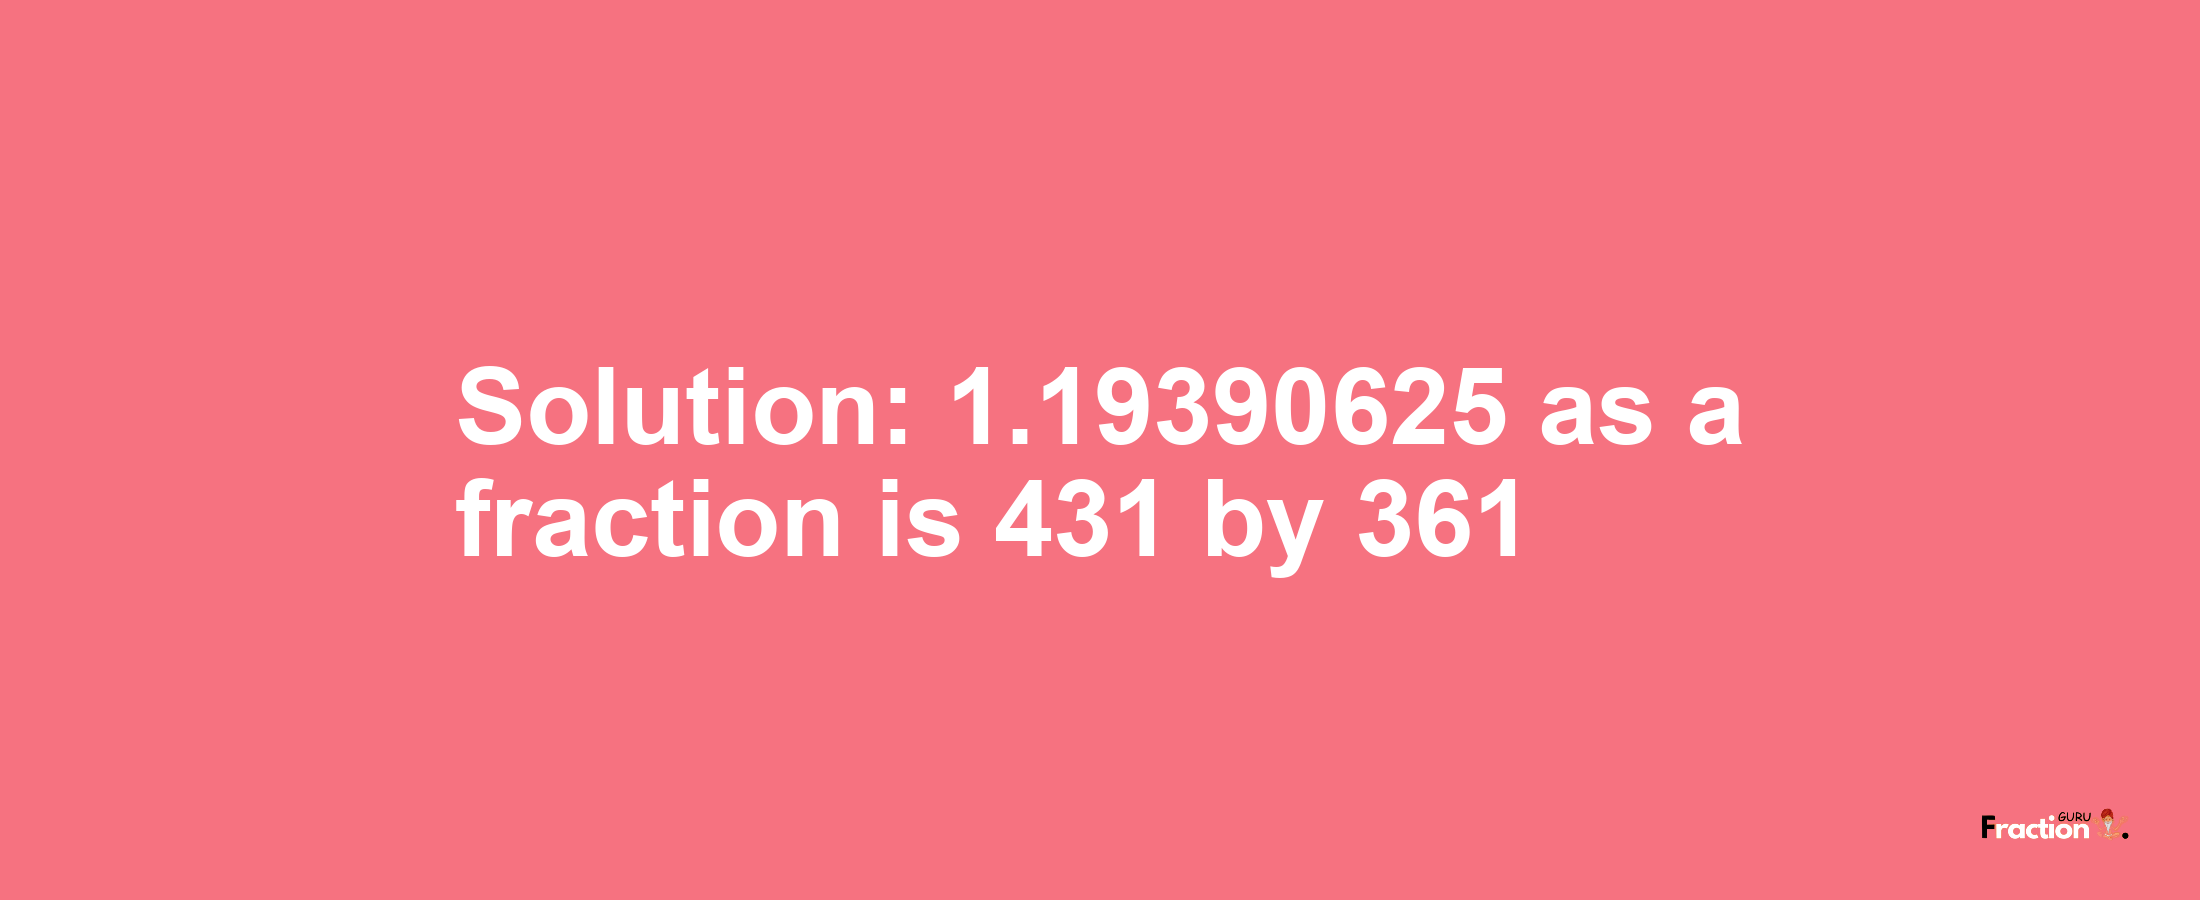 Solution:1.19390625 as a fraction is 431/361